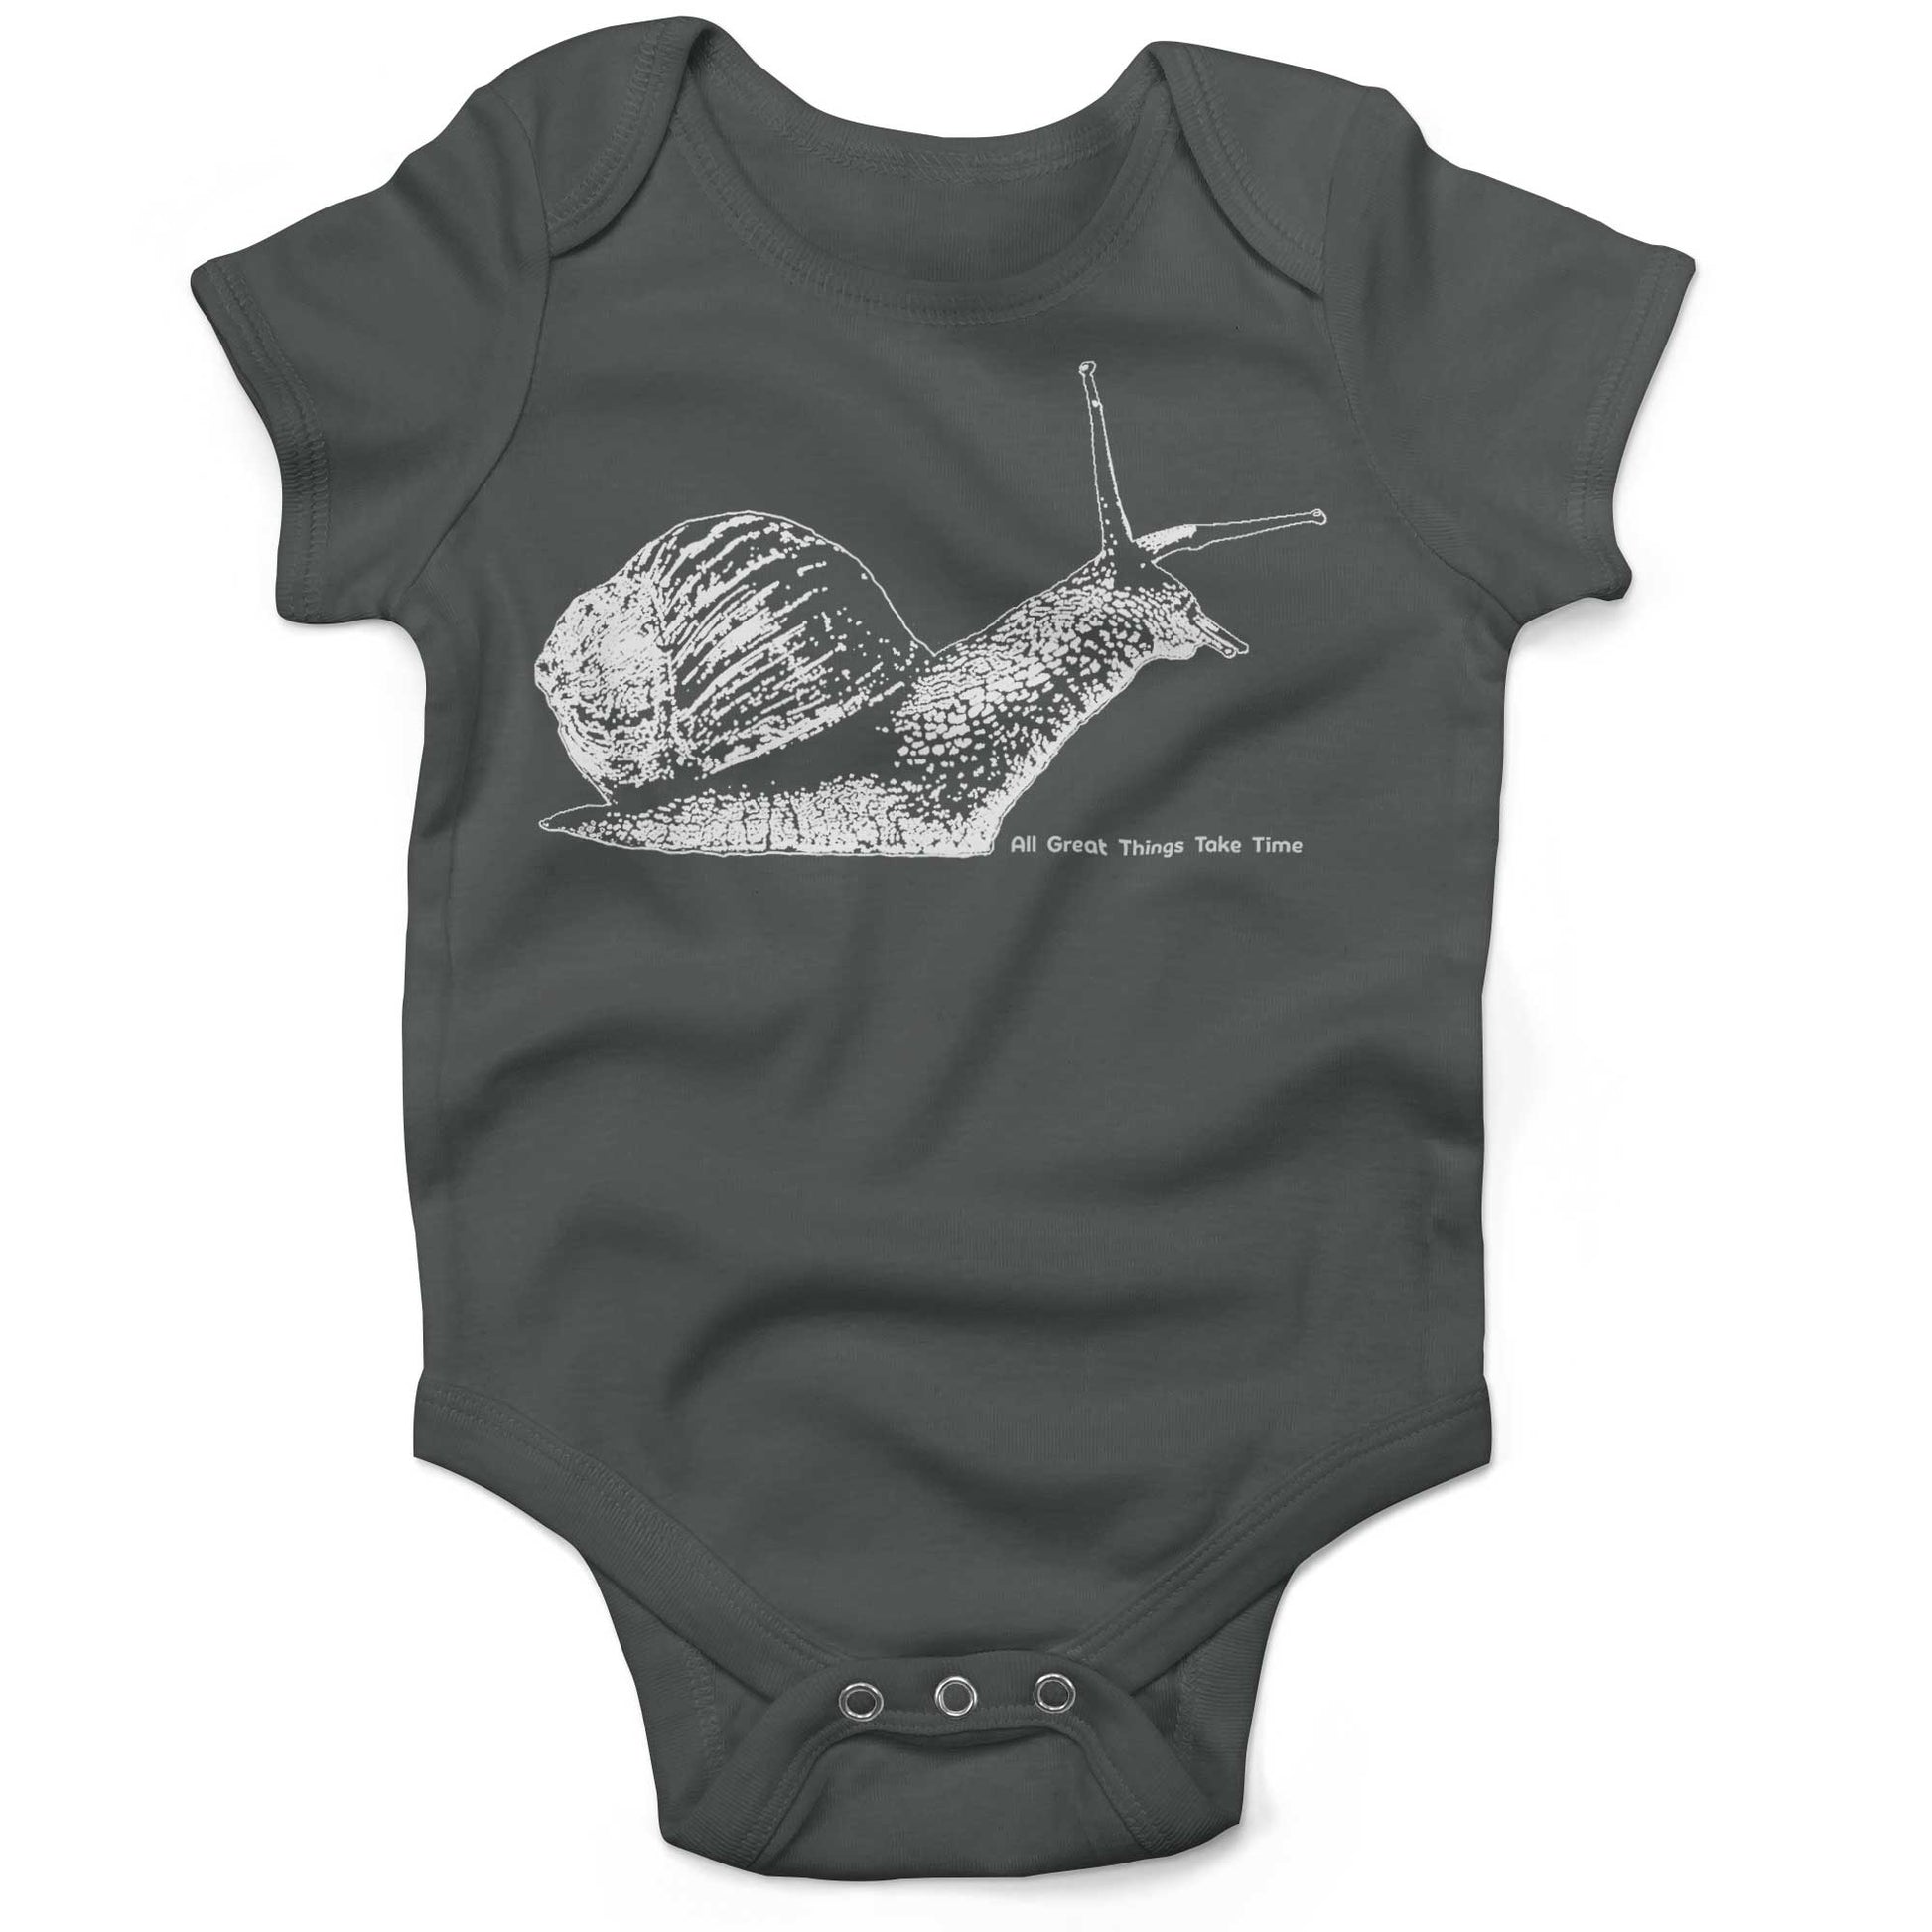 All Great Things Take Time Baby One Piece-Organic Asphalt-3-6 months